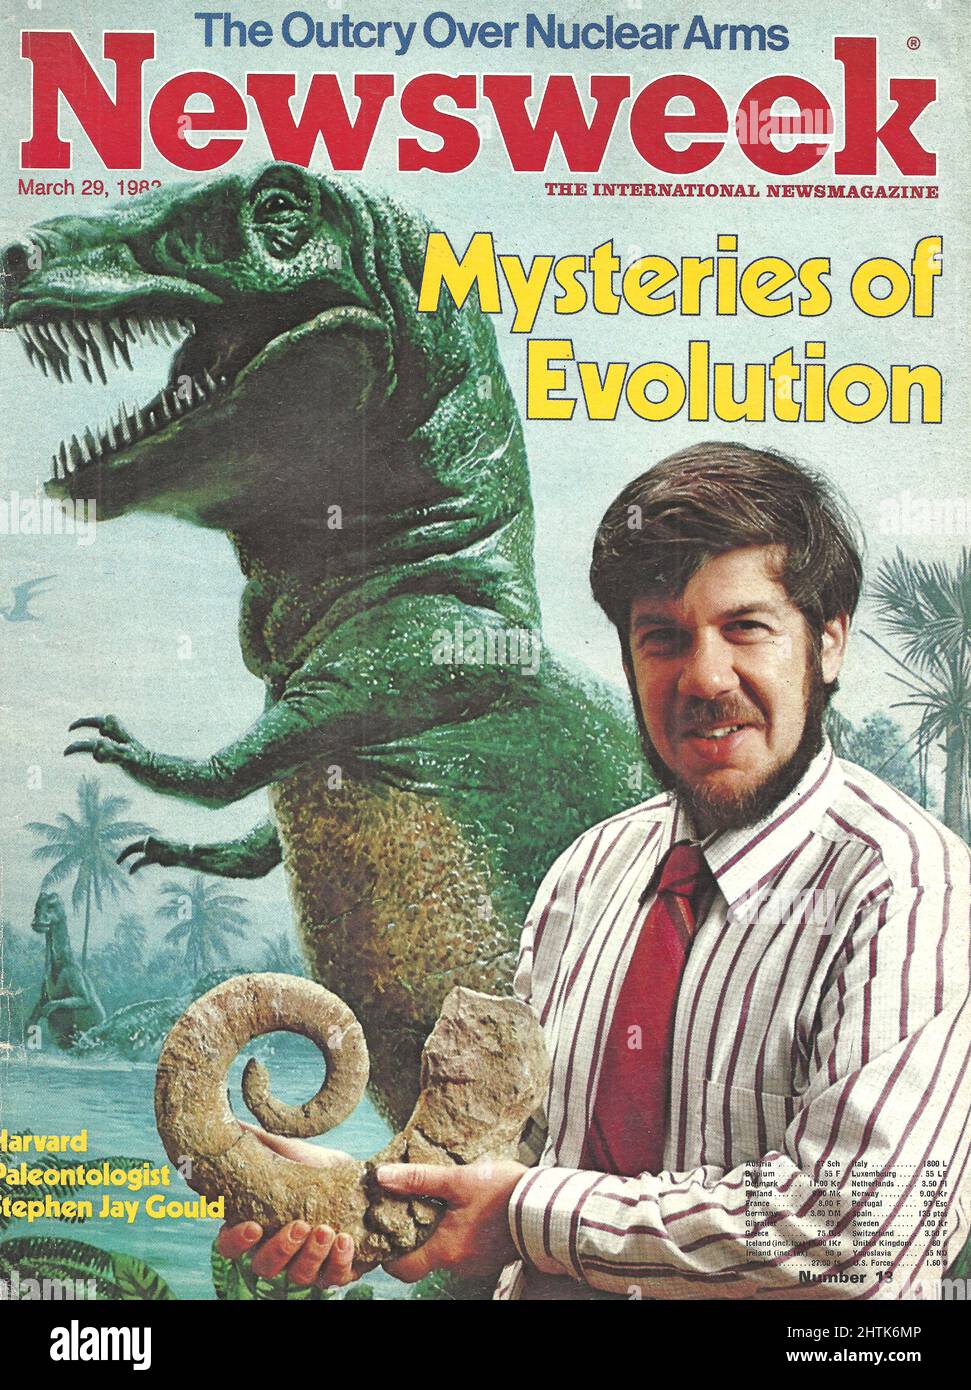 Newsweek cover March 29 1982The outcry over nuclear arms Mysteries of evolution, Dinosaurs Stock Photo